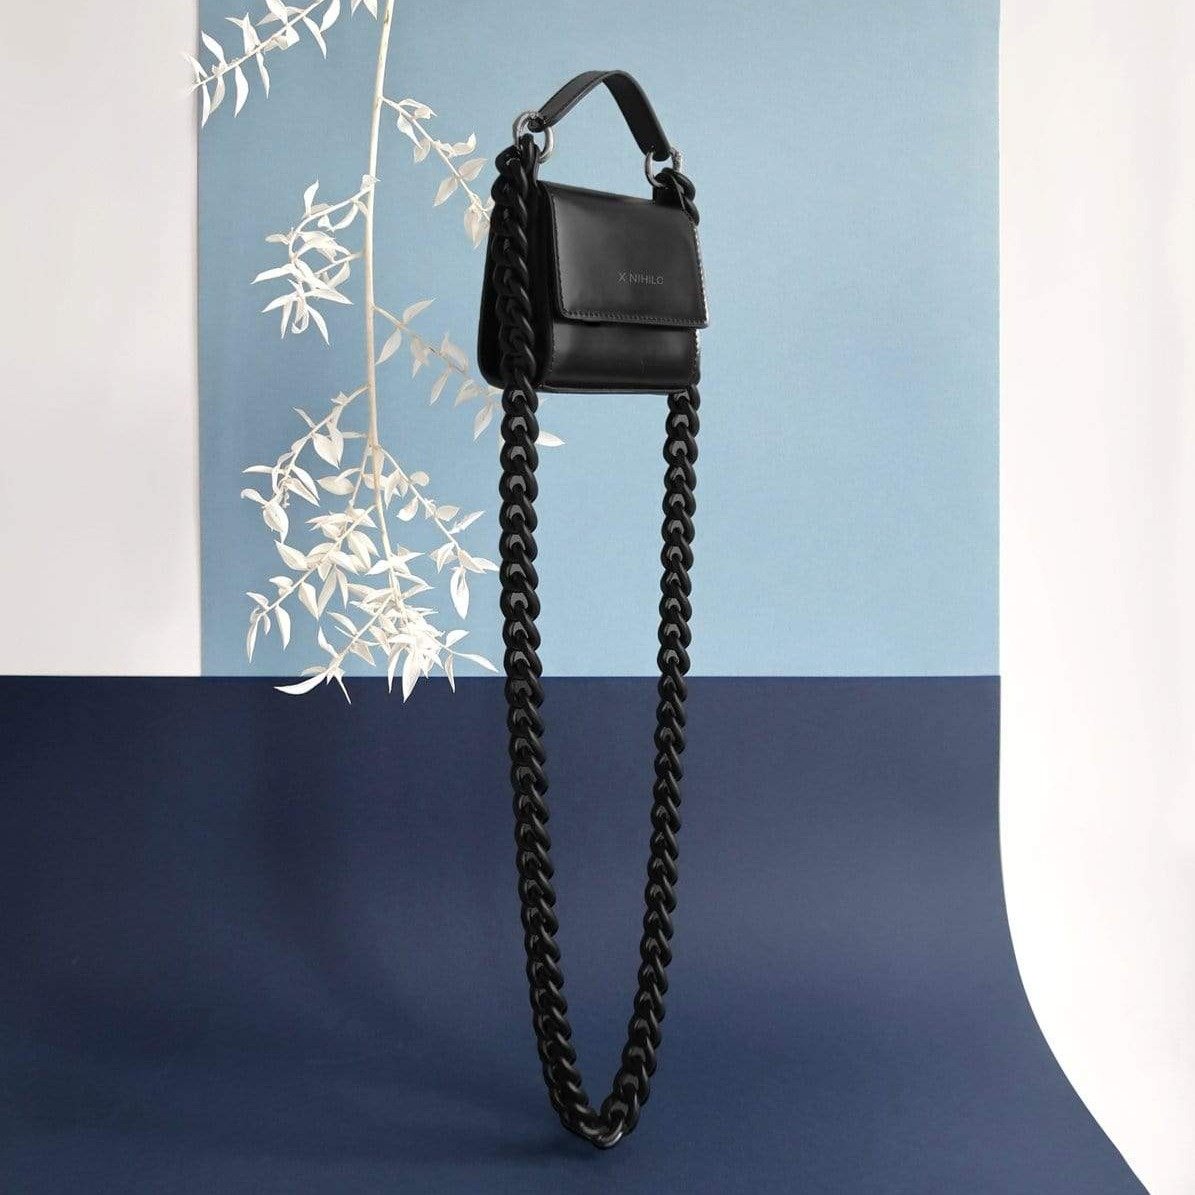 X NIHILO - TRANQUIL MINI SHOULDER BAG - BLACK Long back on blue backgrounds with white branch